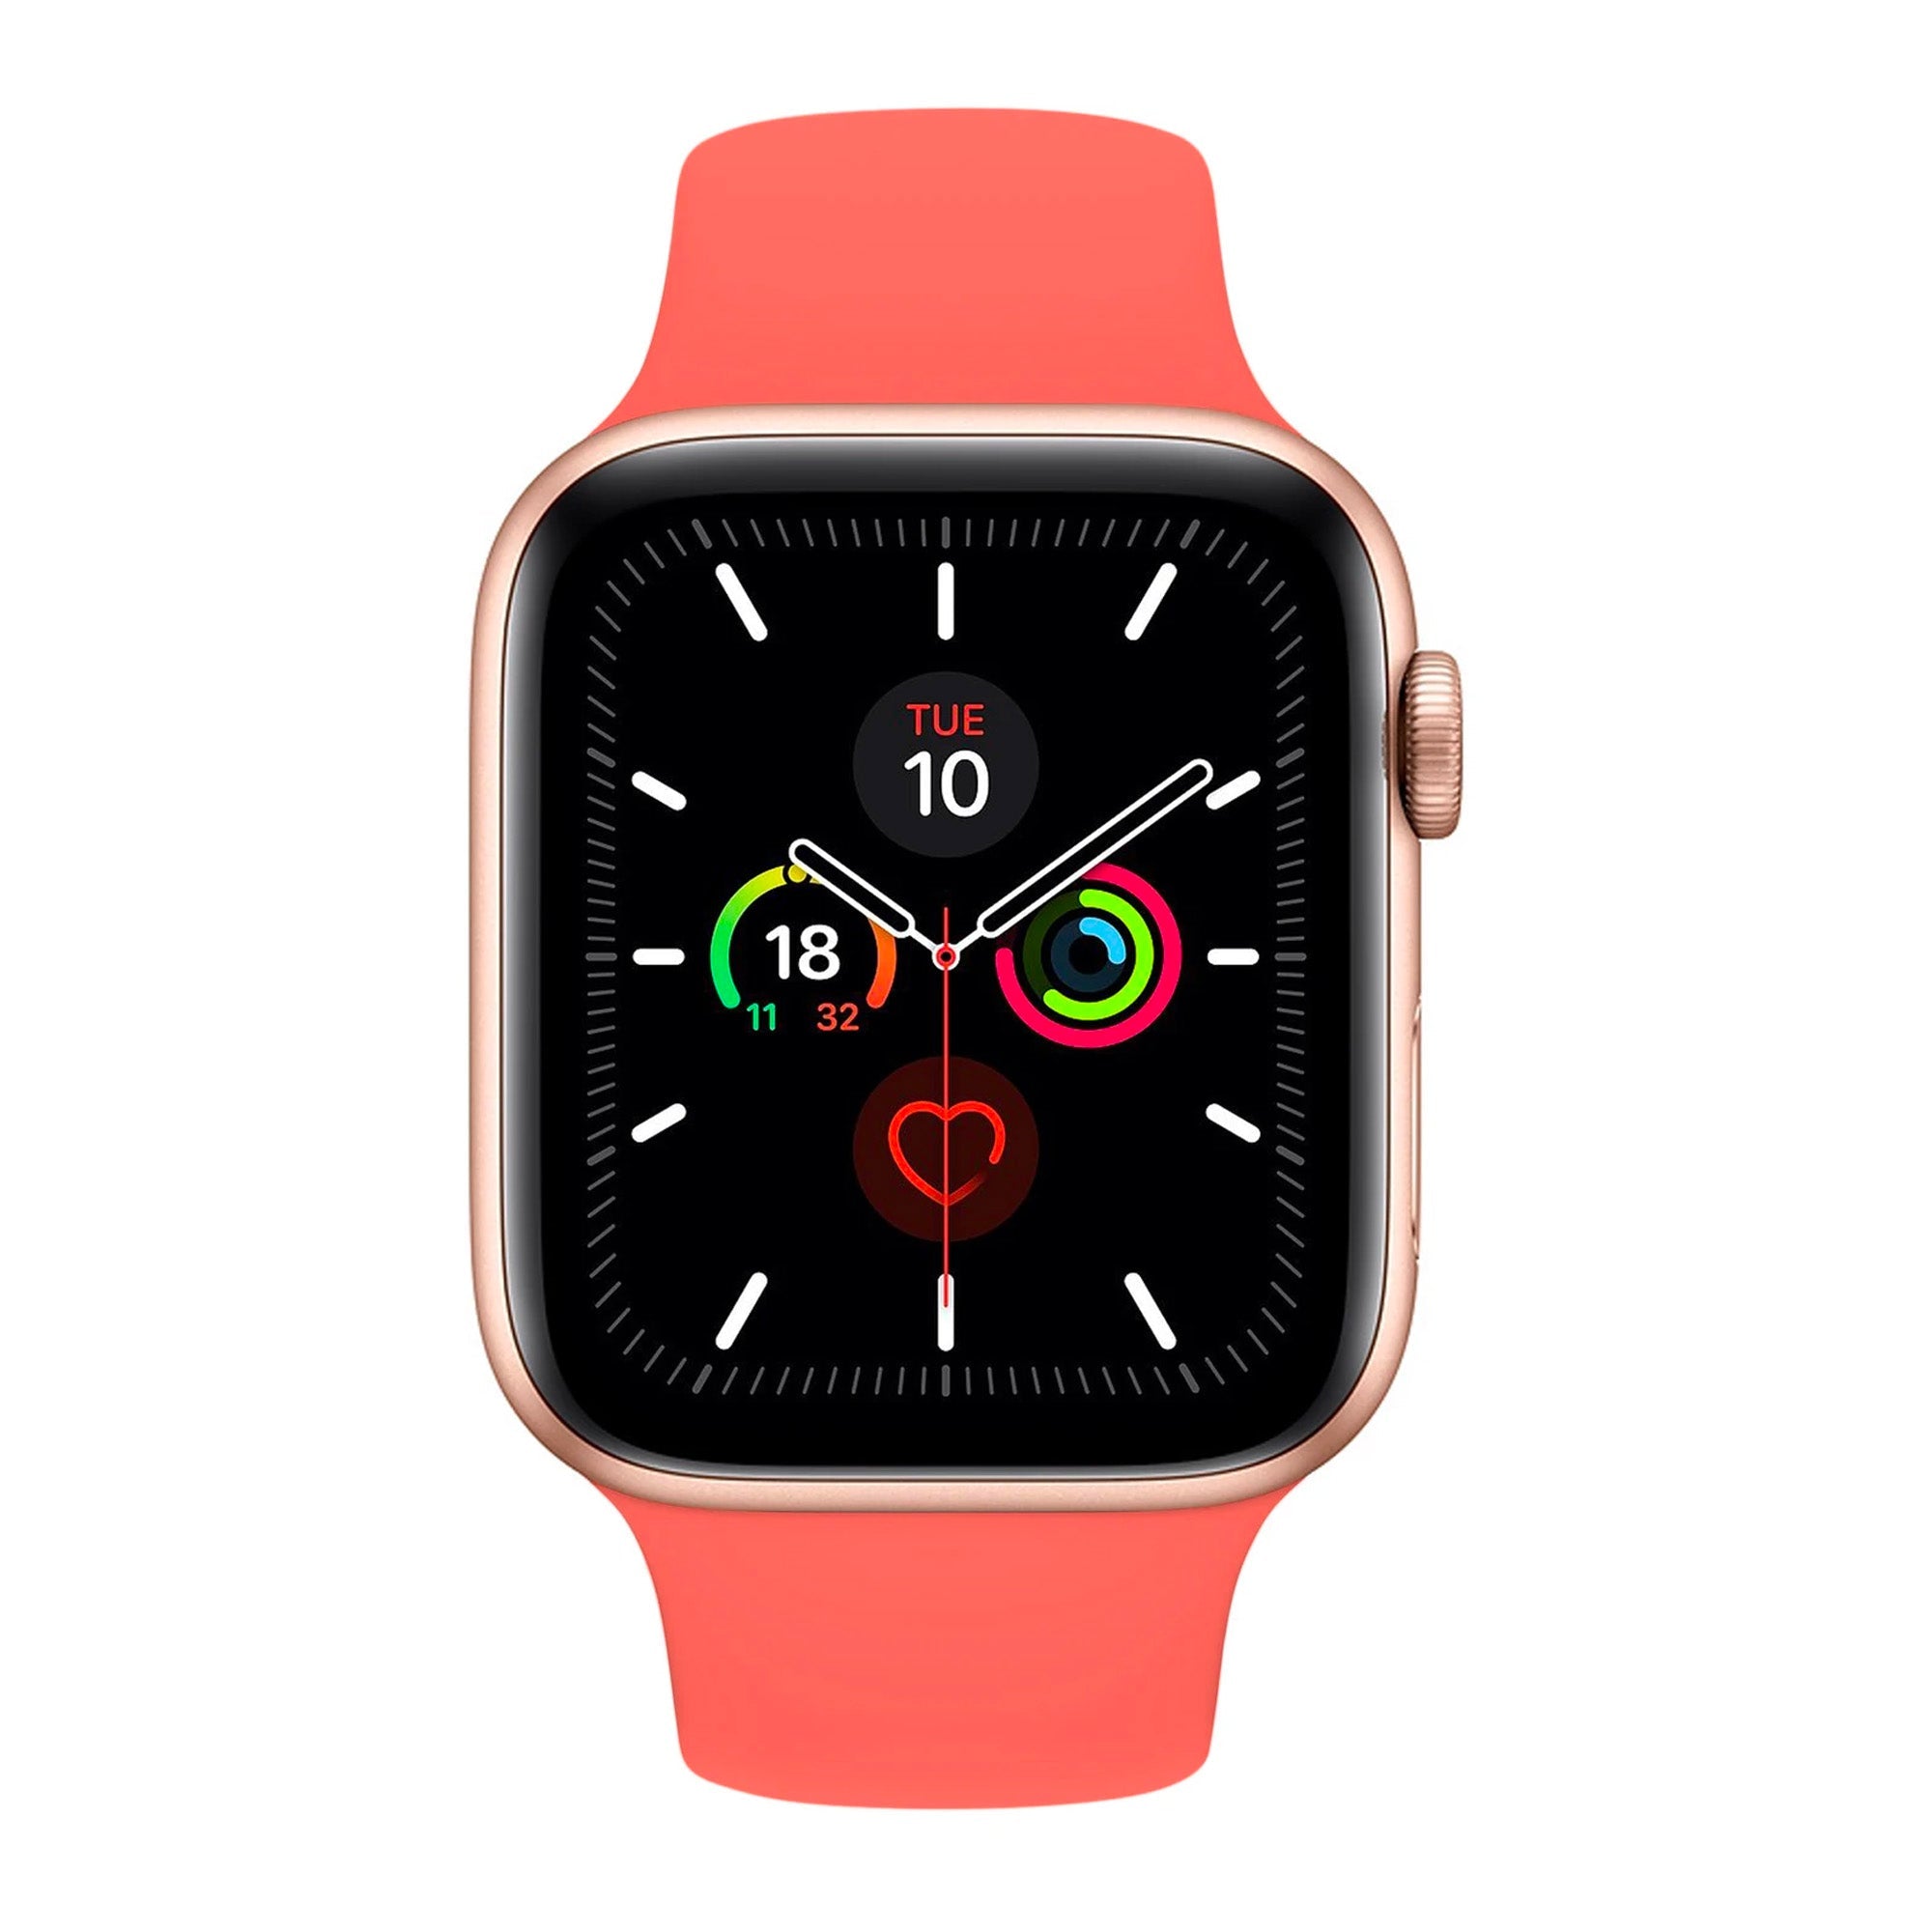 Coral Red Silicone Band for Apple Watch Silicone Bands   Accessories Gifts UK